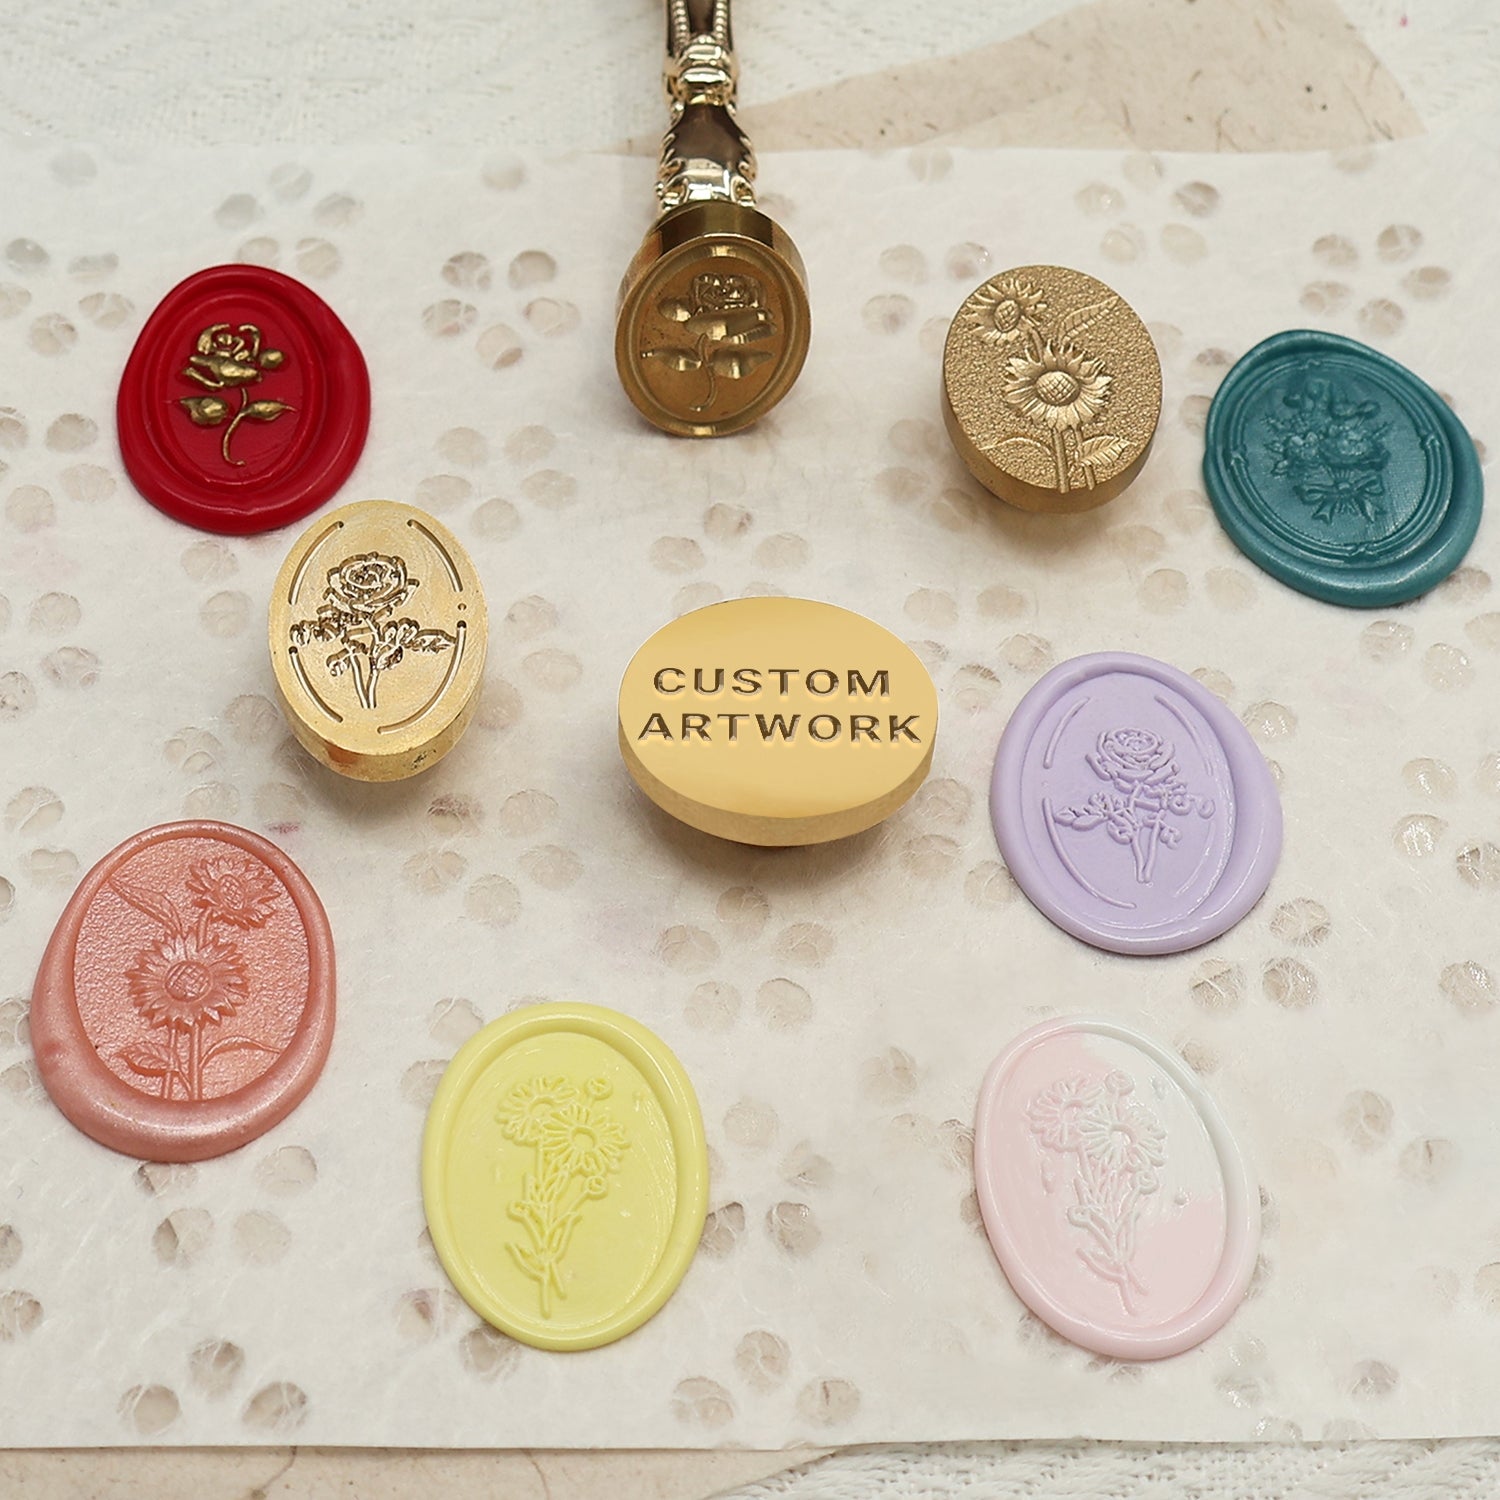 Gold Oval Wax Seal With Vintage Florals (set of 10) Wax Seals by